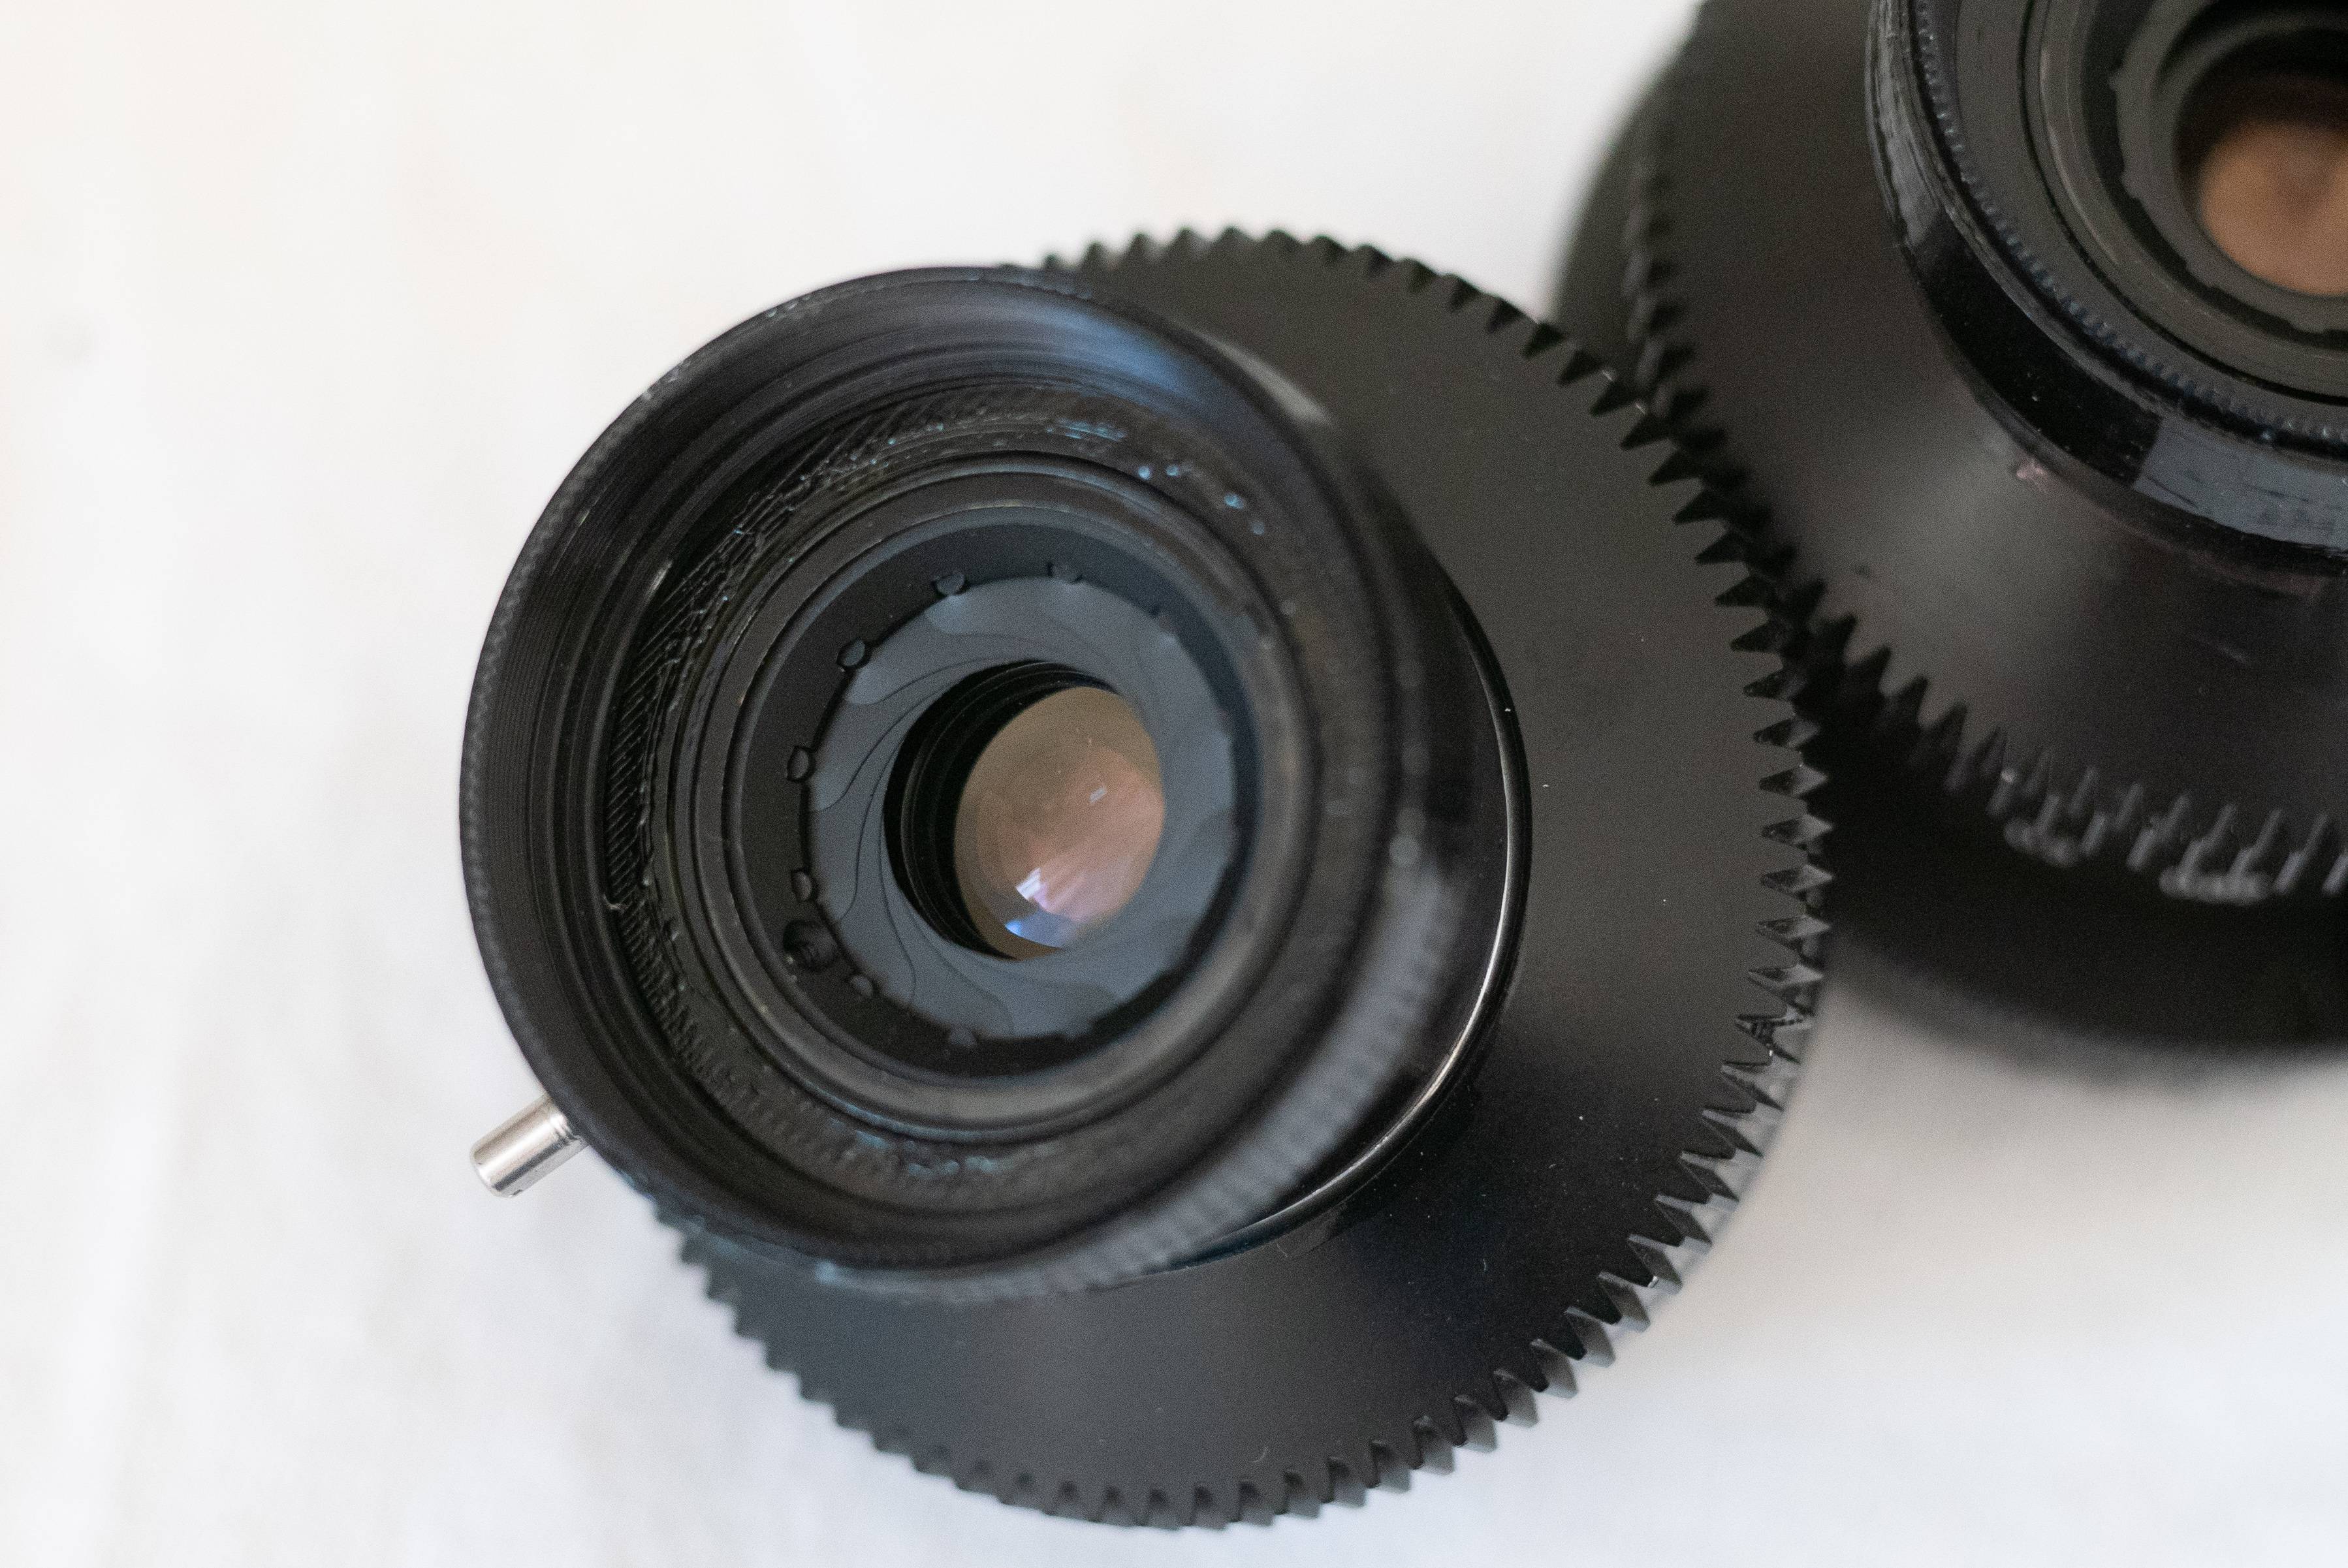 The nose of the adapted lens with the aperture set.